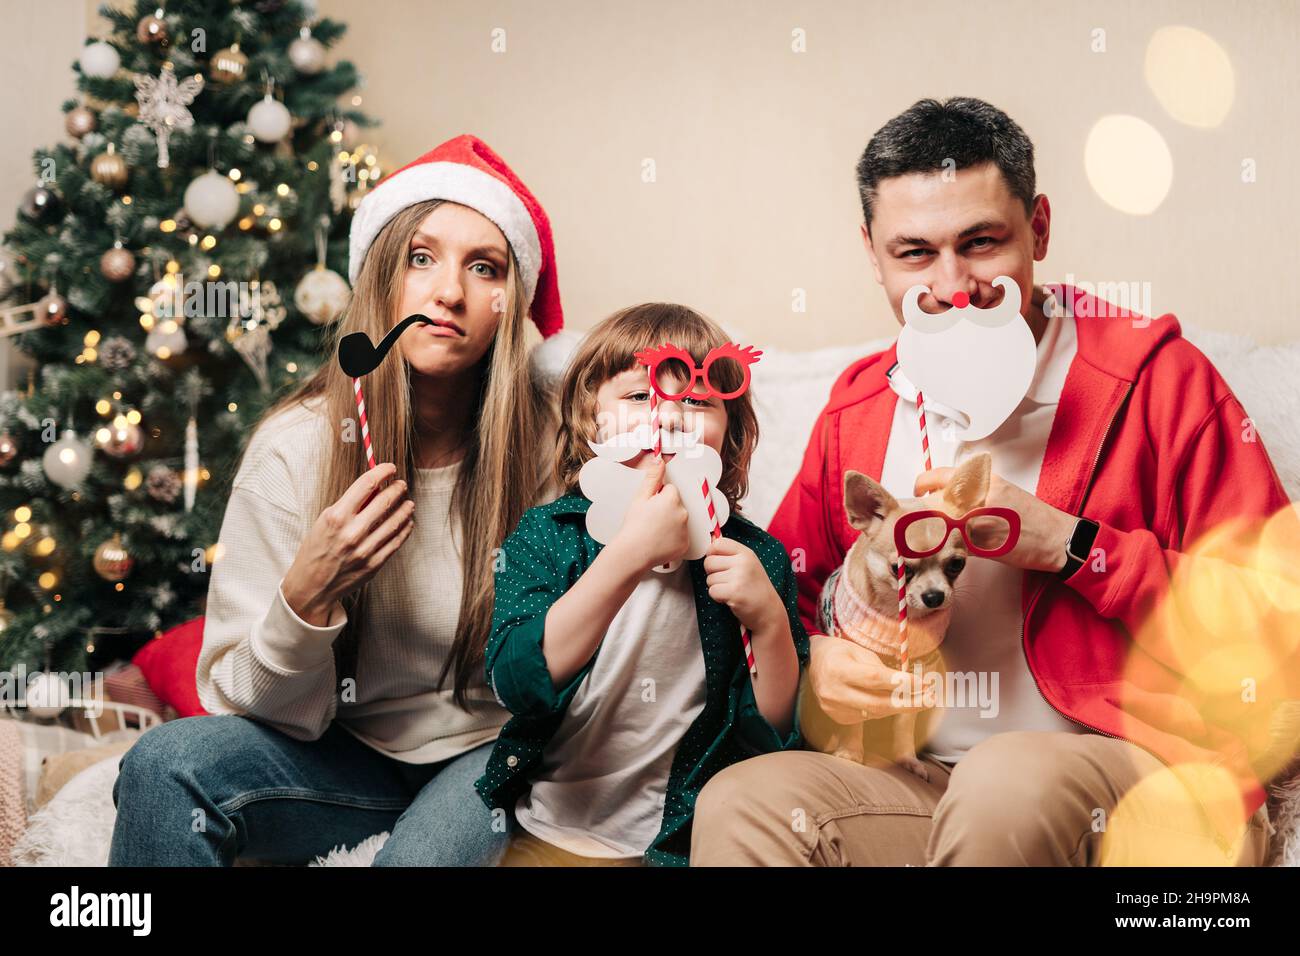 Portrait of happy family with kid son and puppy holding festive party props for photo booth. Mother in Santa hat, father, child boy and dog in sweater Stock Photo